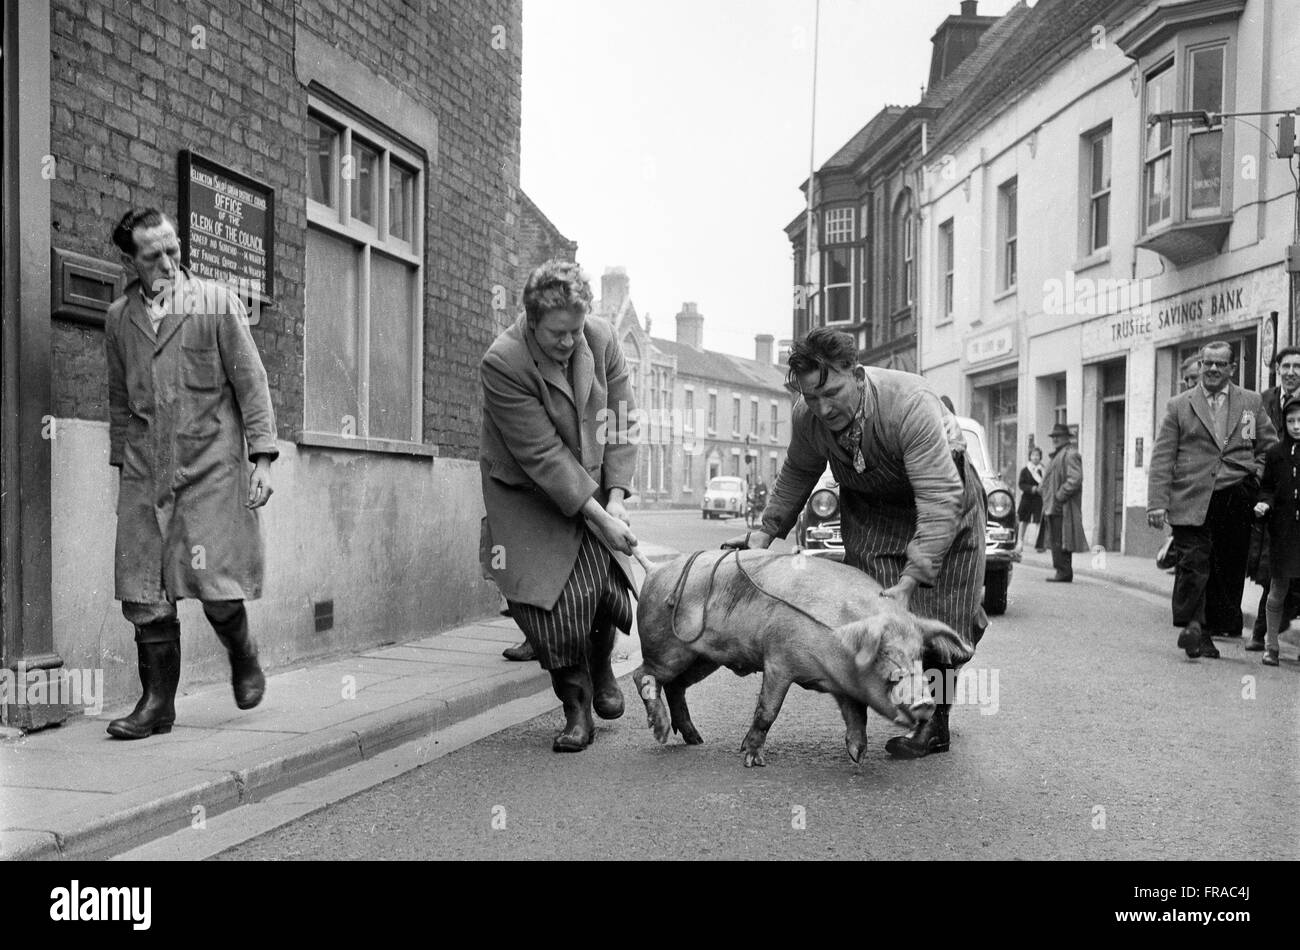 An escaped pig is caught by butchers and slaughter men in a busy street in 1960s Britain Stock Photo